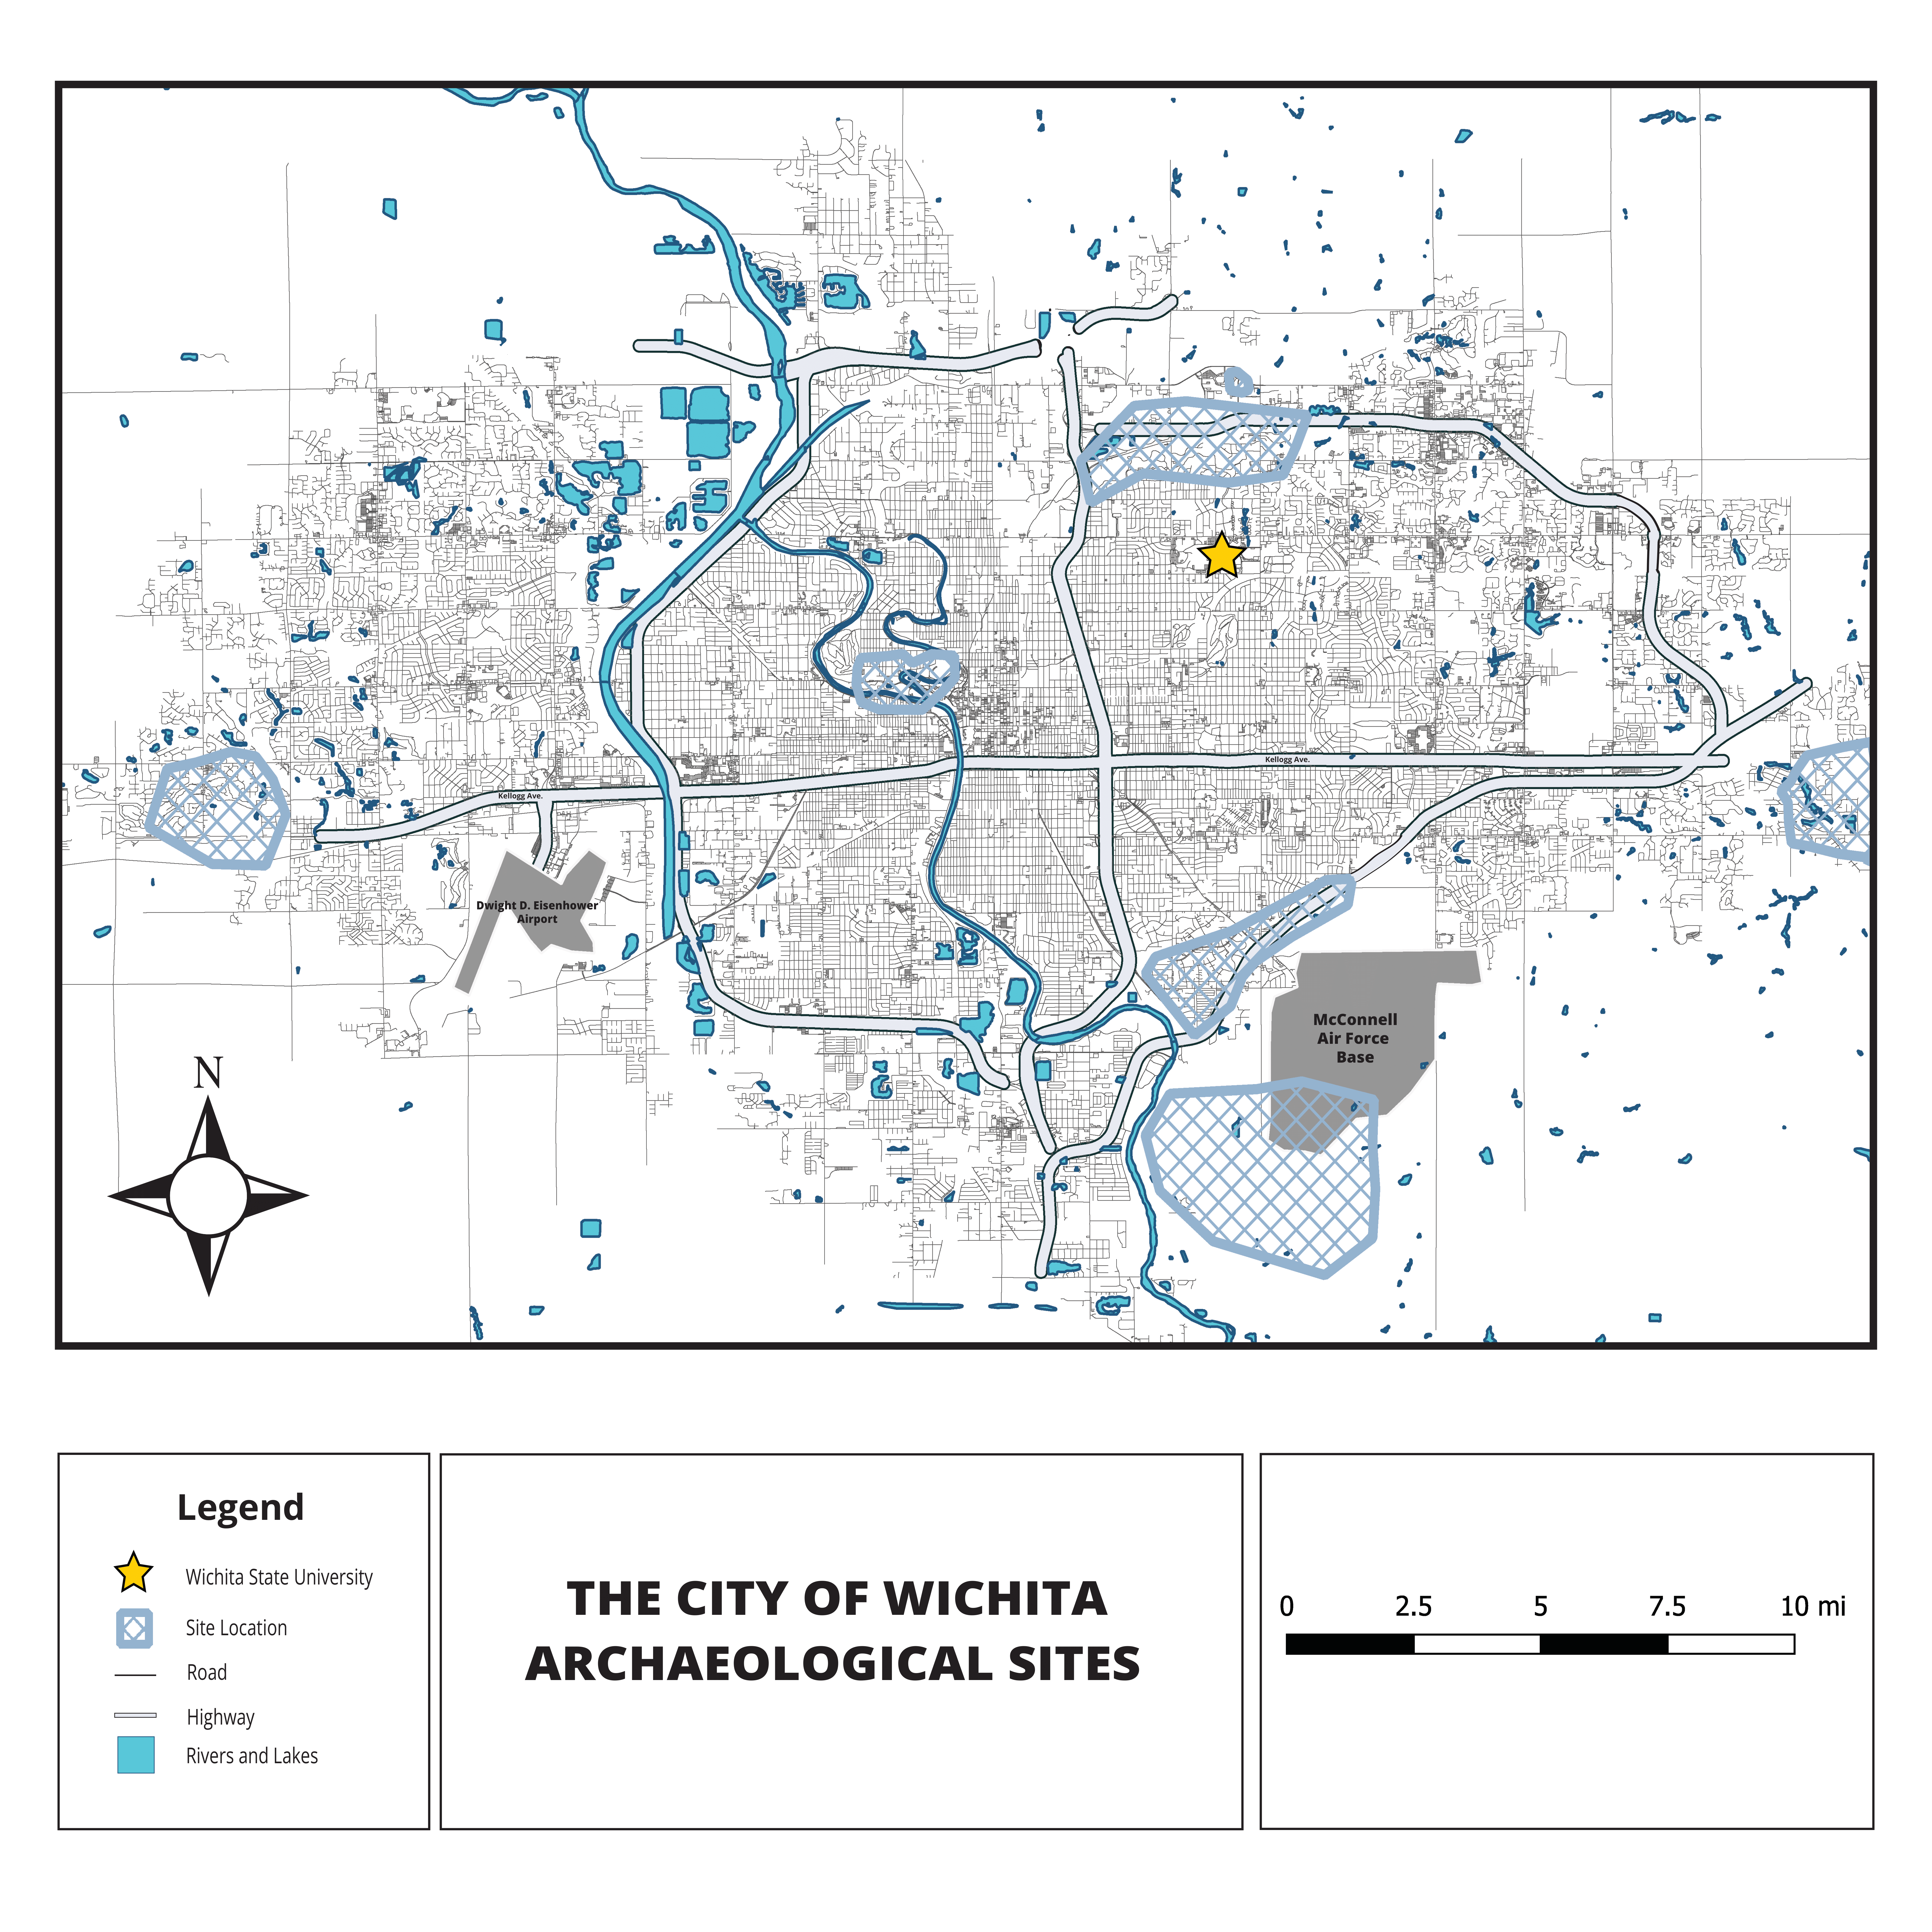 Map of Wichita. Different areas are shaded blue to represent where archaeological surveys have occurred